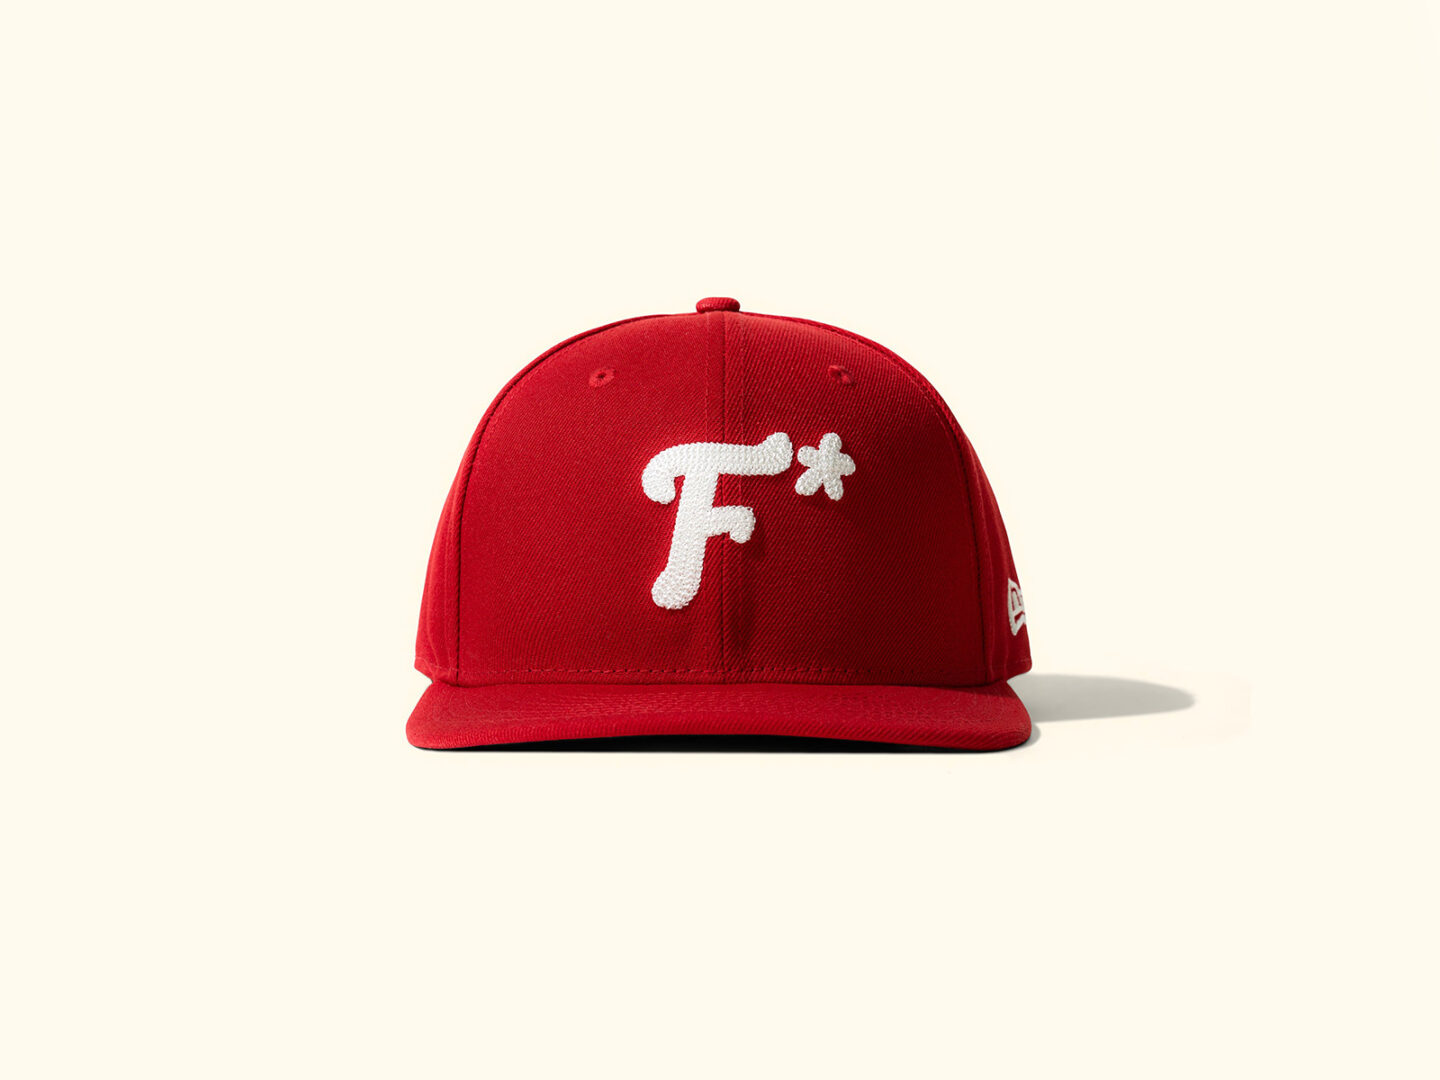 GOLF Le FLEUR* teams up with New Era to offer exclusive caps